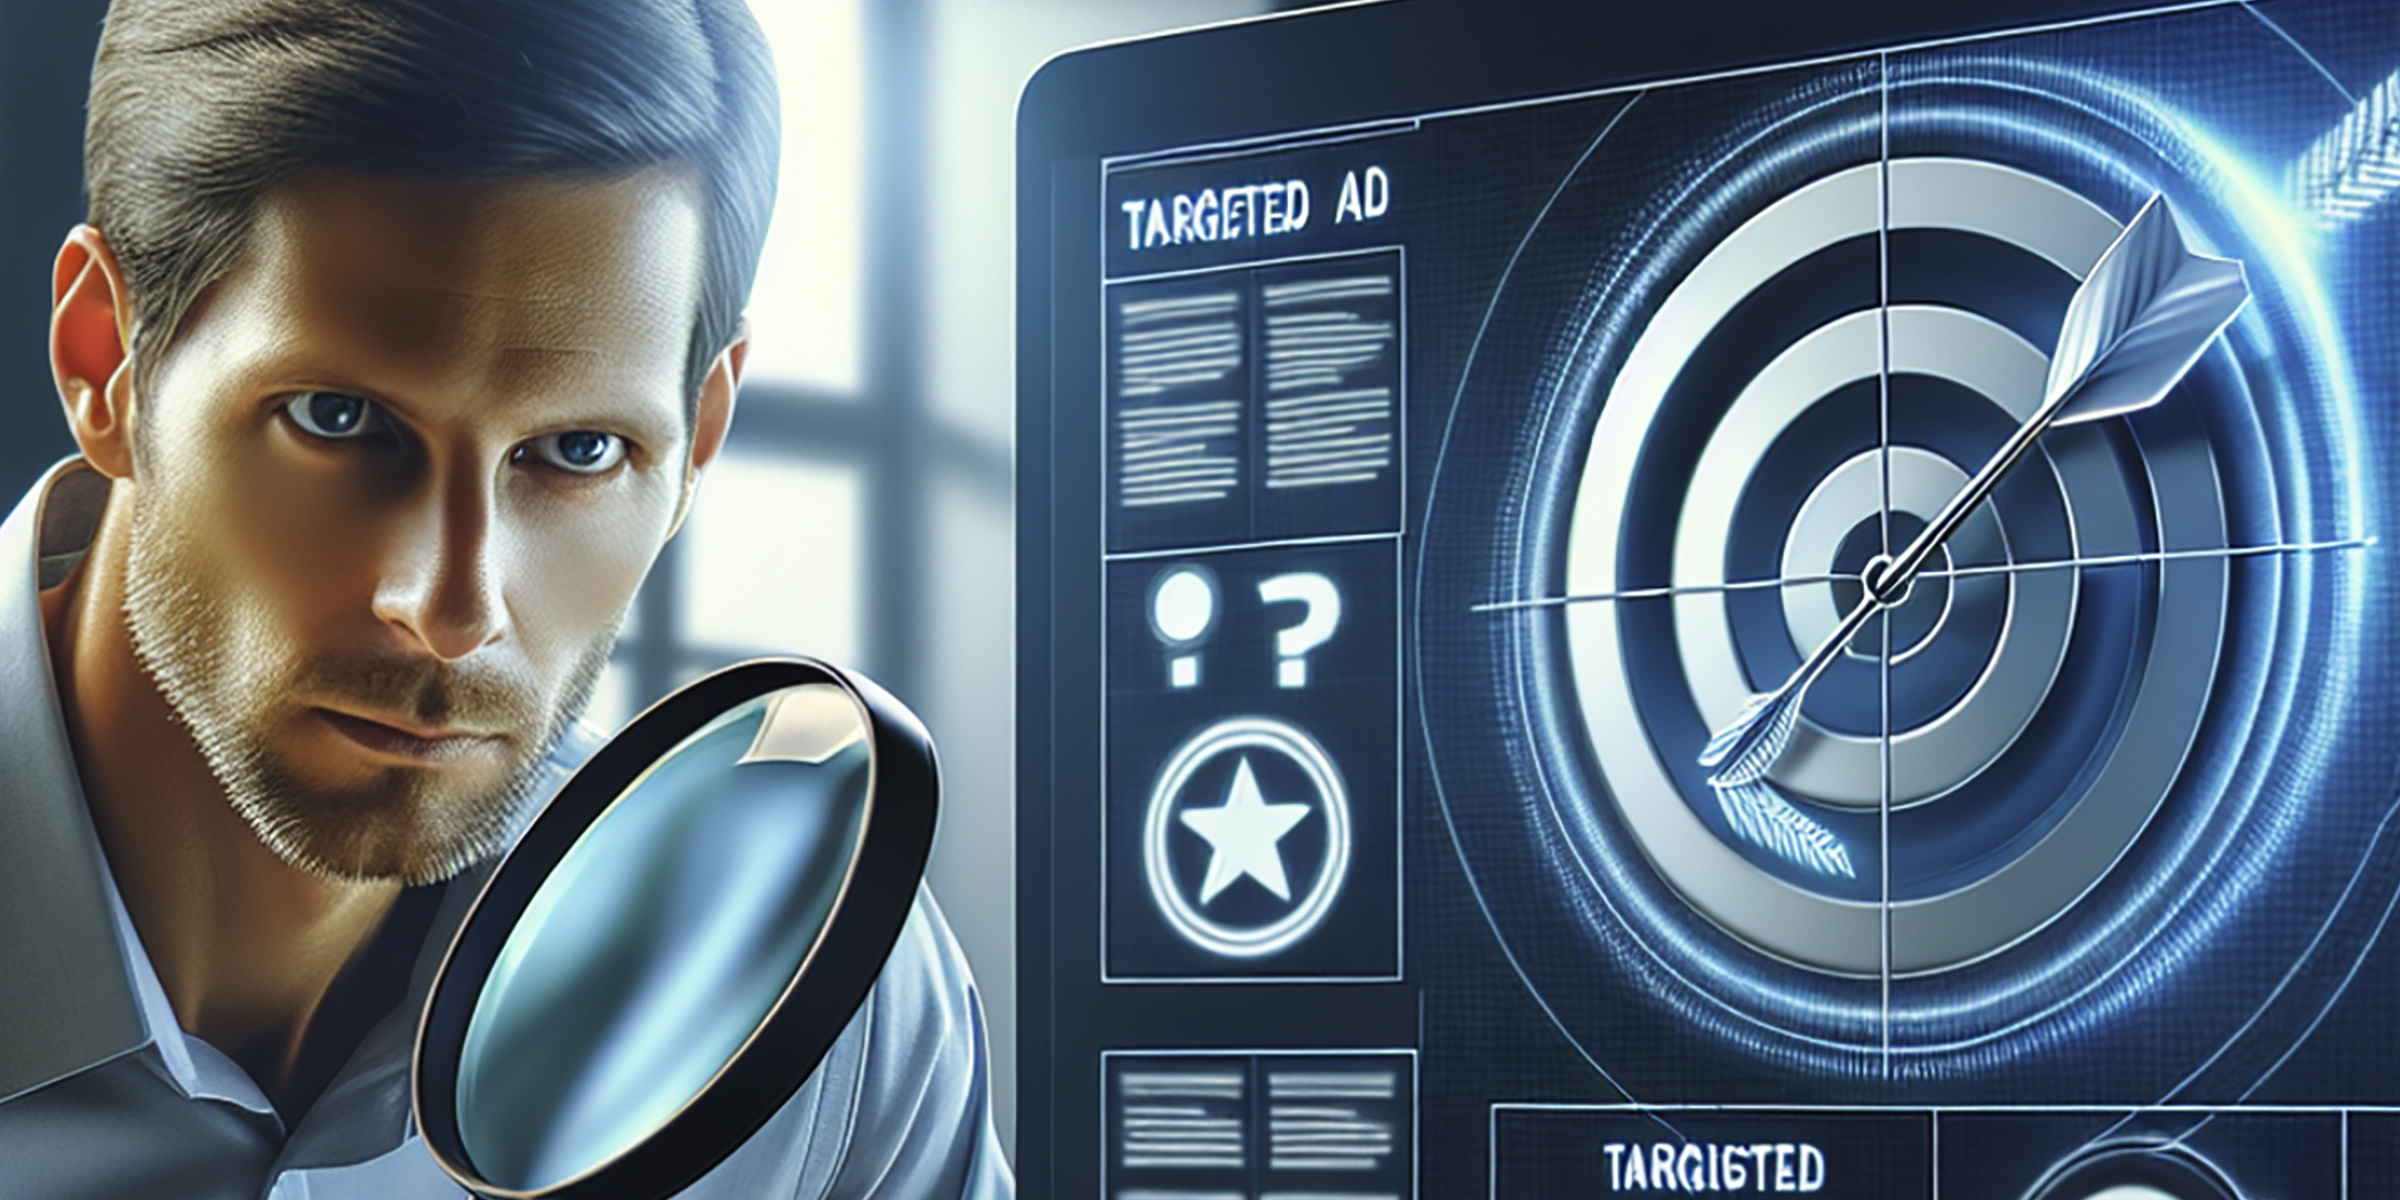 Image of man looking at targeted ad as an illustration of different retargeting strategies